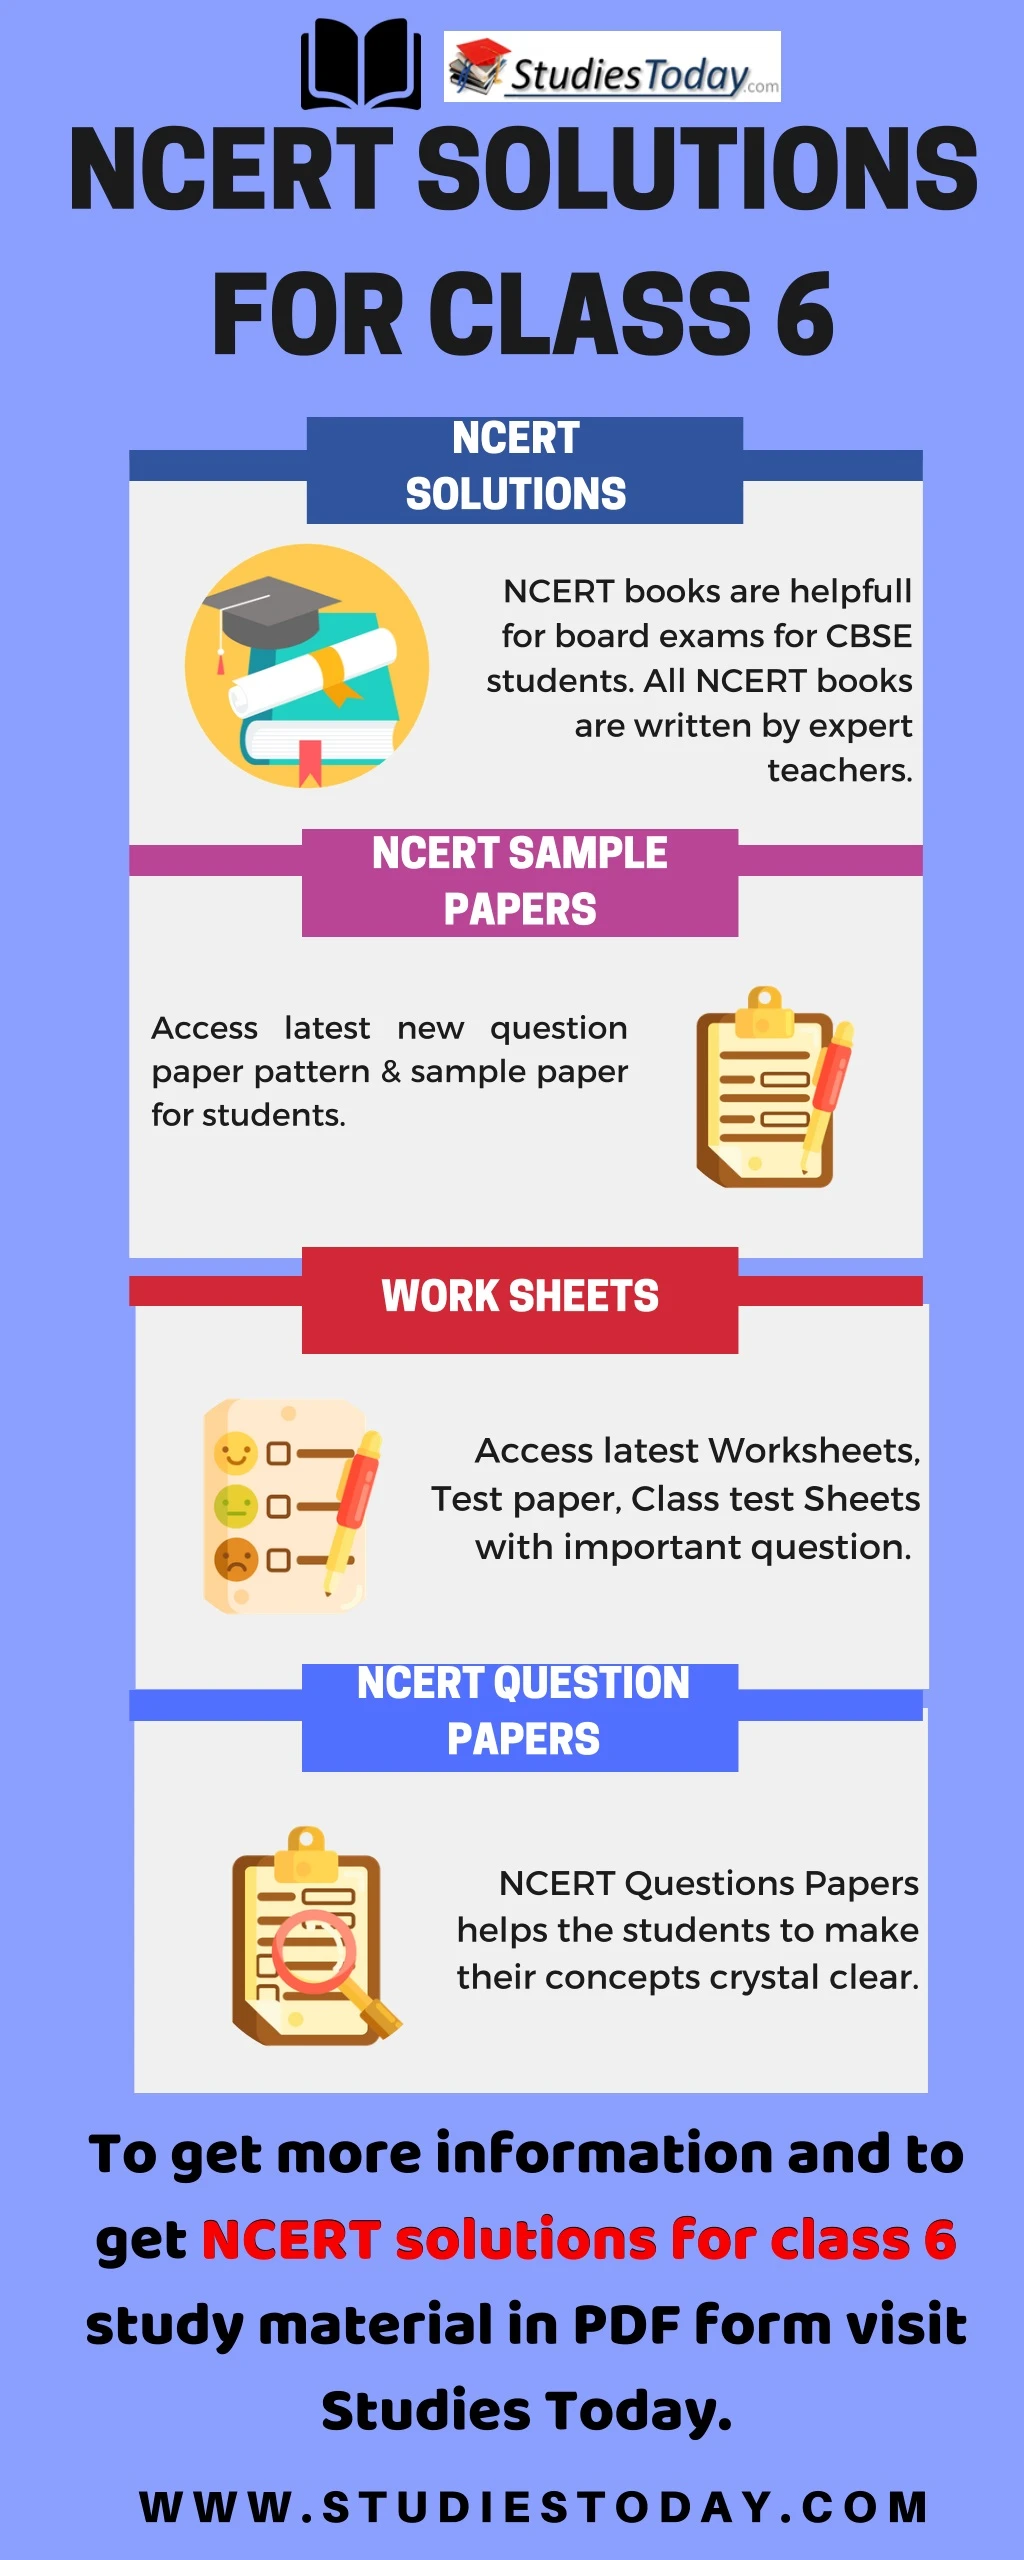 ncert solutions for class 6